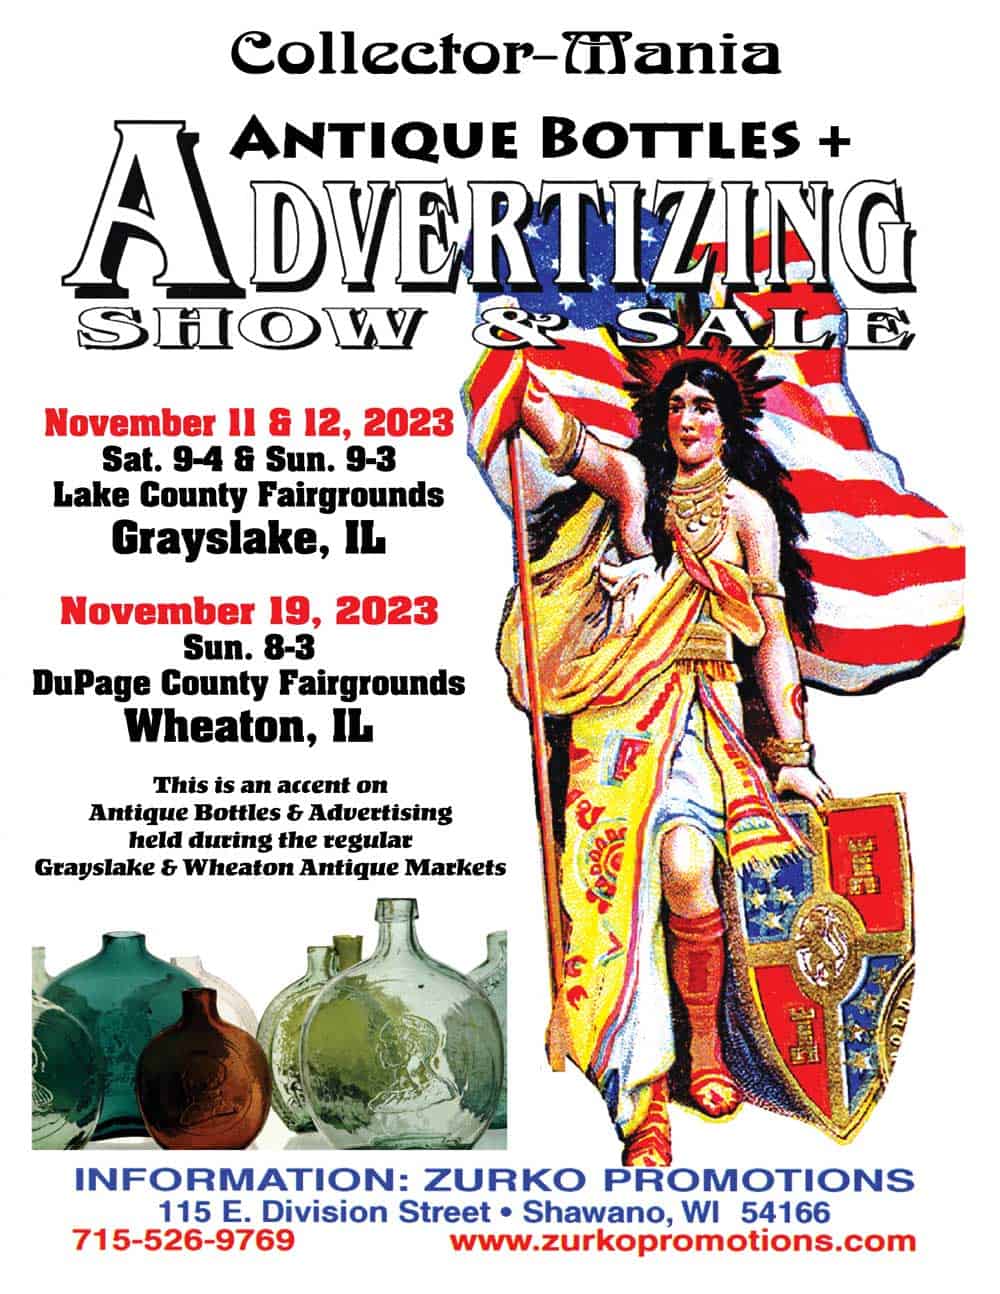 antique advertising and bottle show